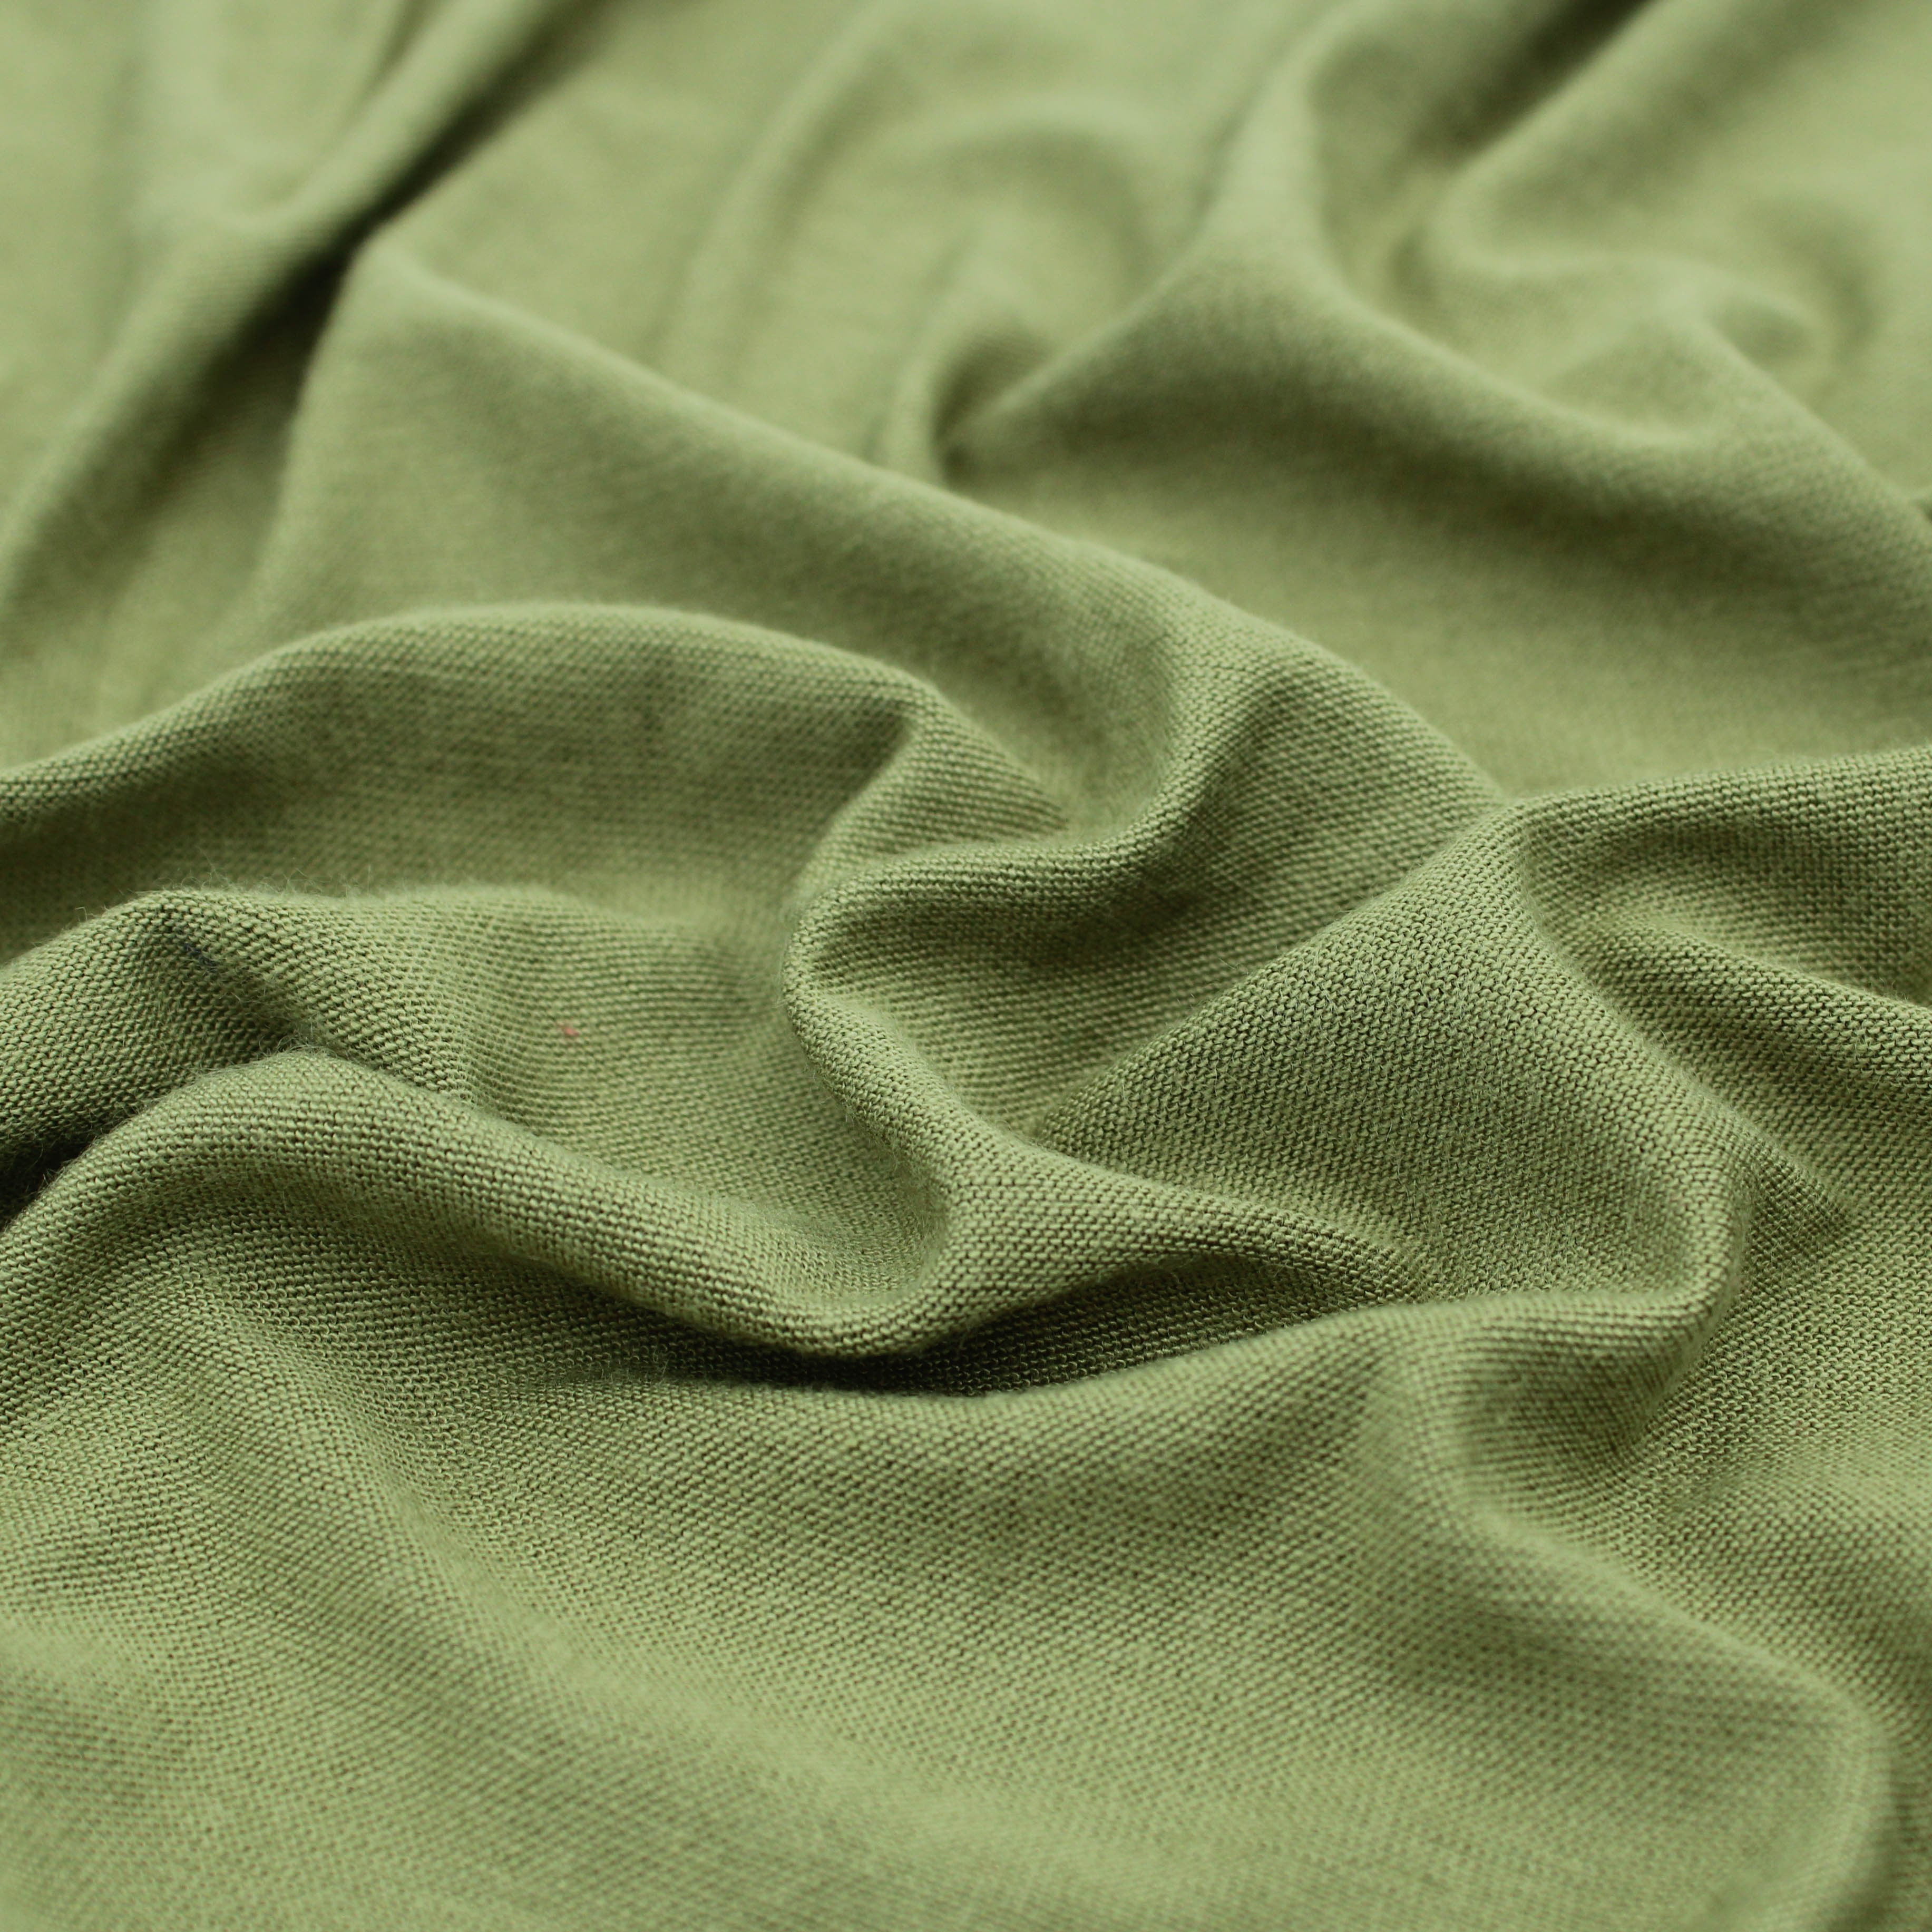 Synthetic Jersey Knit Fabric Brushed Jersey Knit Fabric Heather Olive Green Jersey Knit Fabric